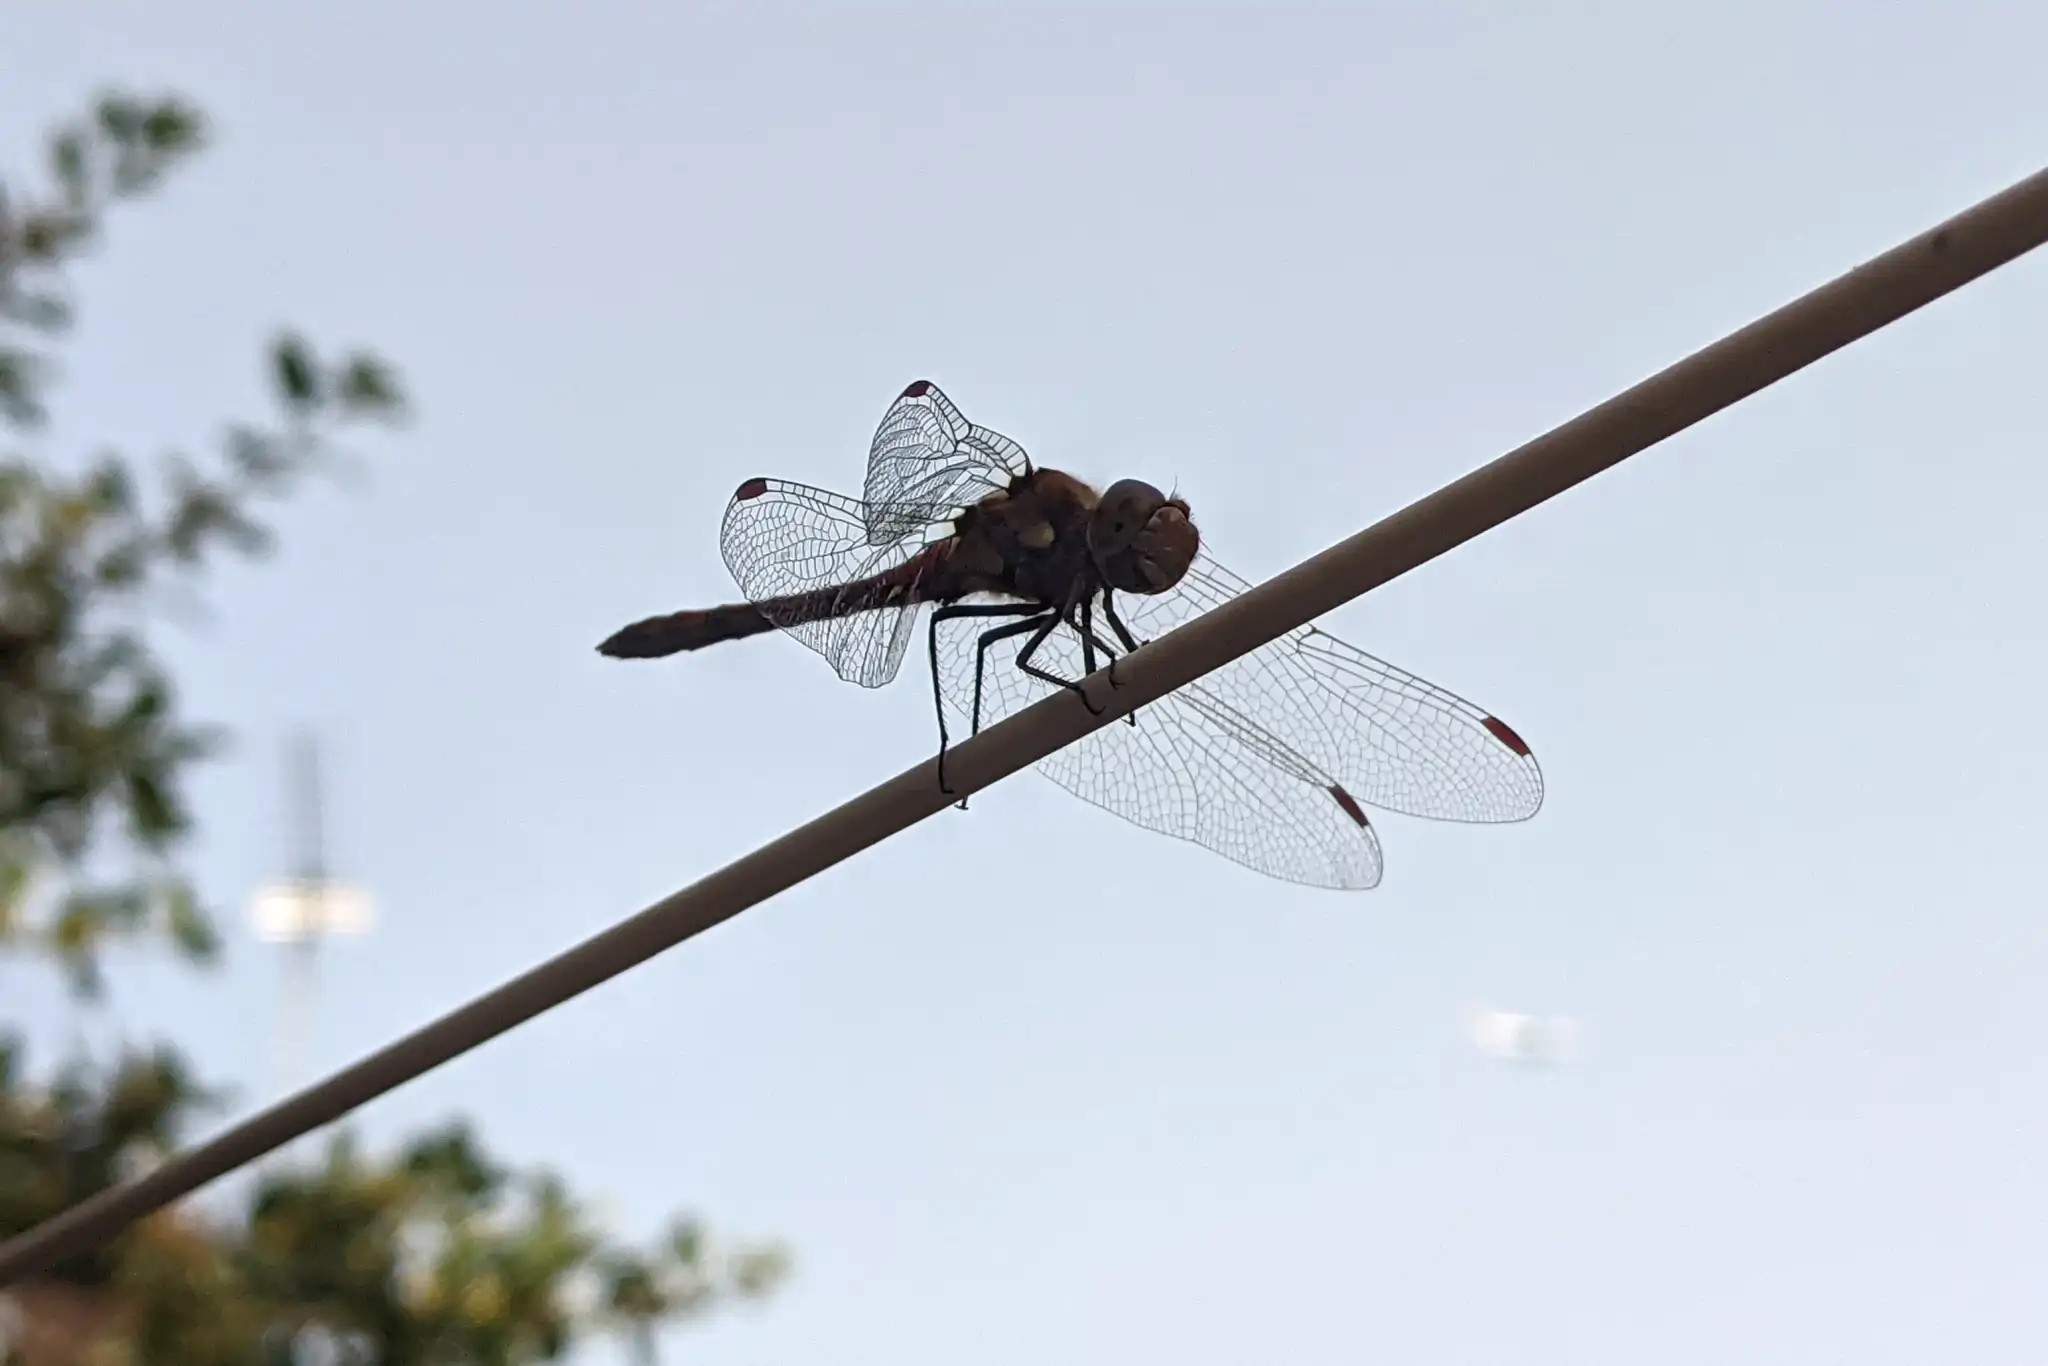 A close-up photo of a dragonfly on a washing line. A distant aeroplane
is visible in the sky behind.